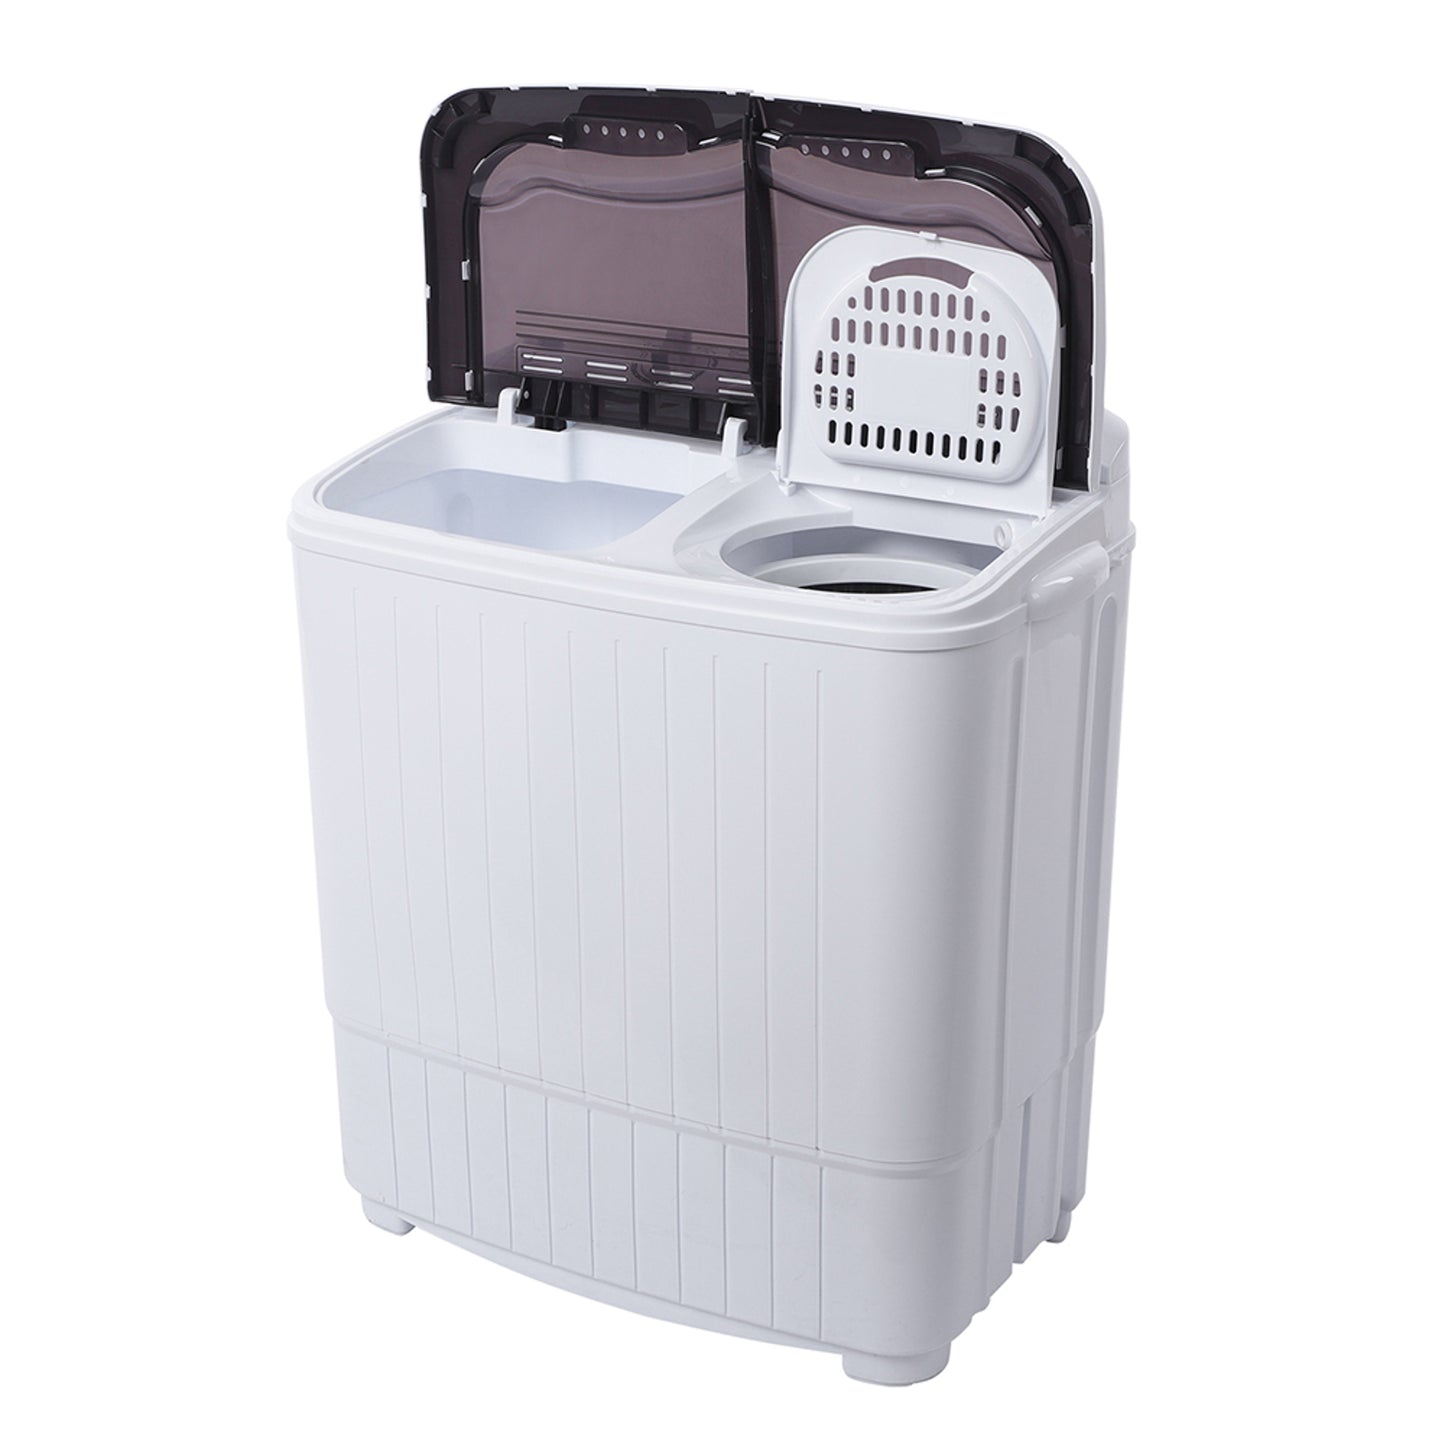 XPB35-ZK35 Compact Twin Tub with Built-in Drain Pump